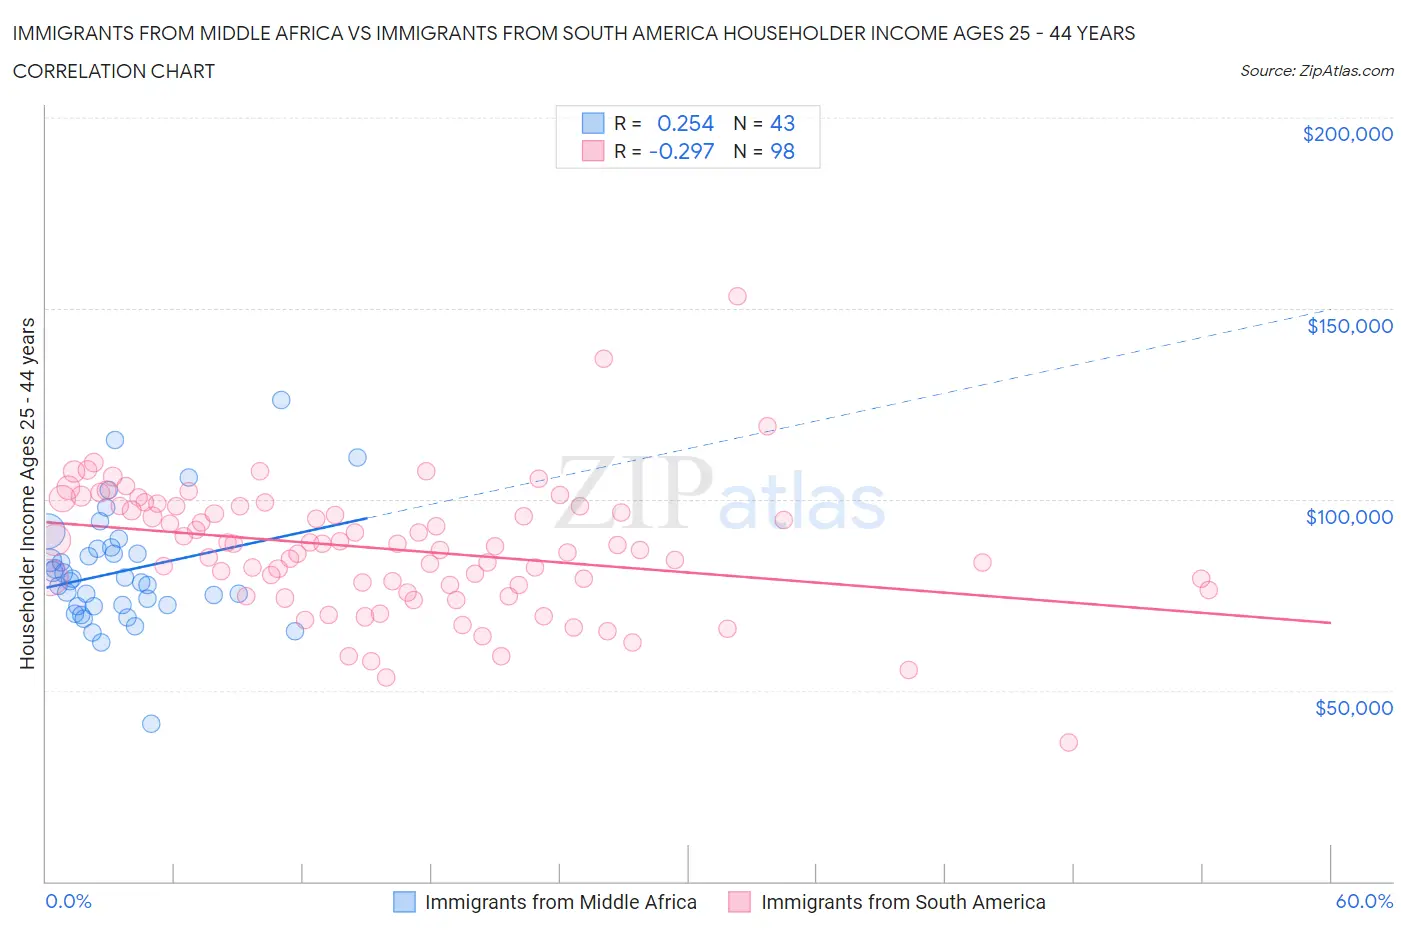 Immigrants from Middle Africa vs Immigrants from South America Householder Income Ages 25 - 44 years